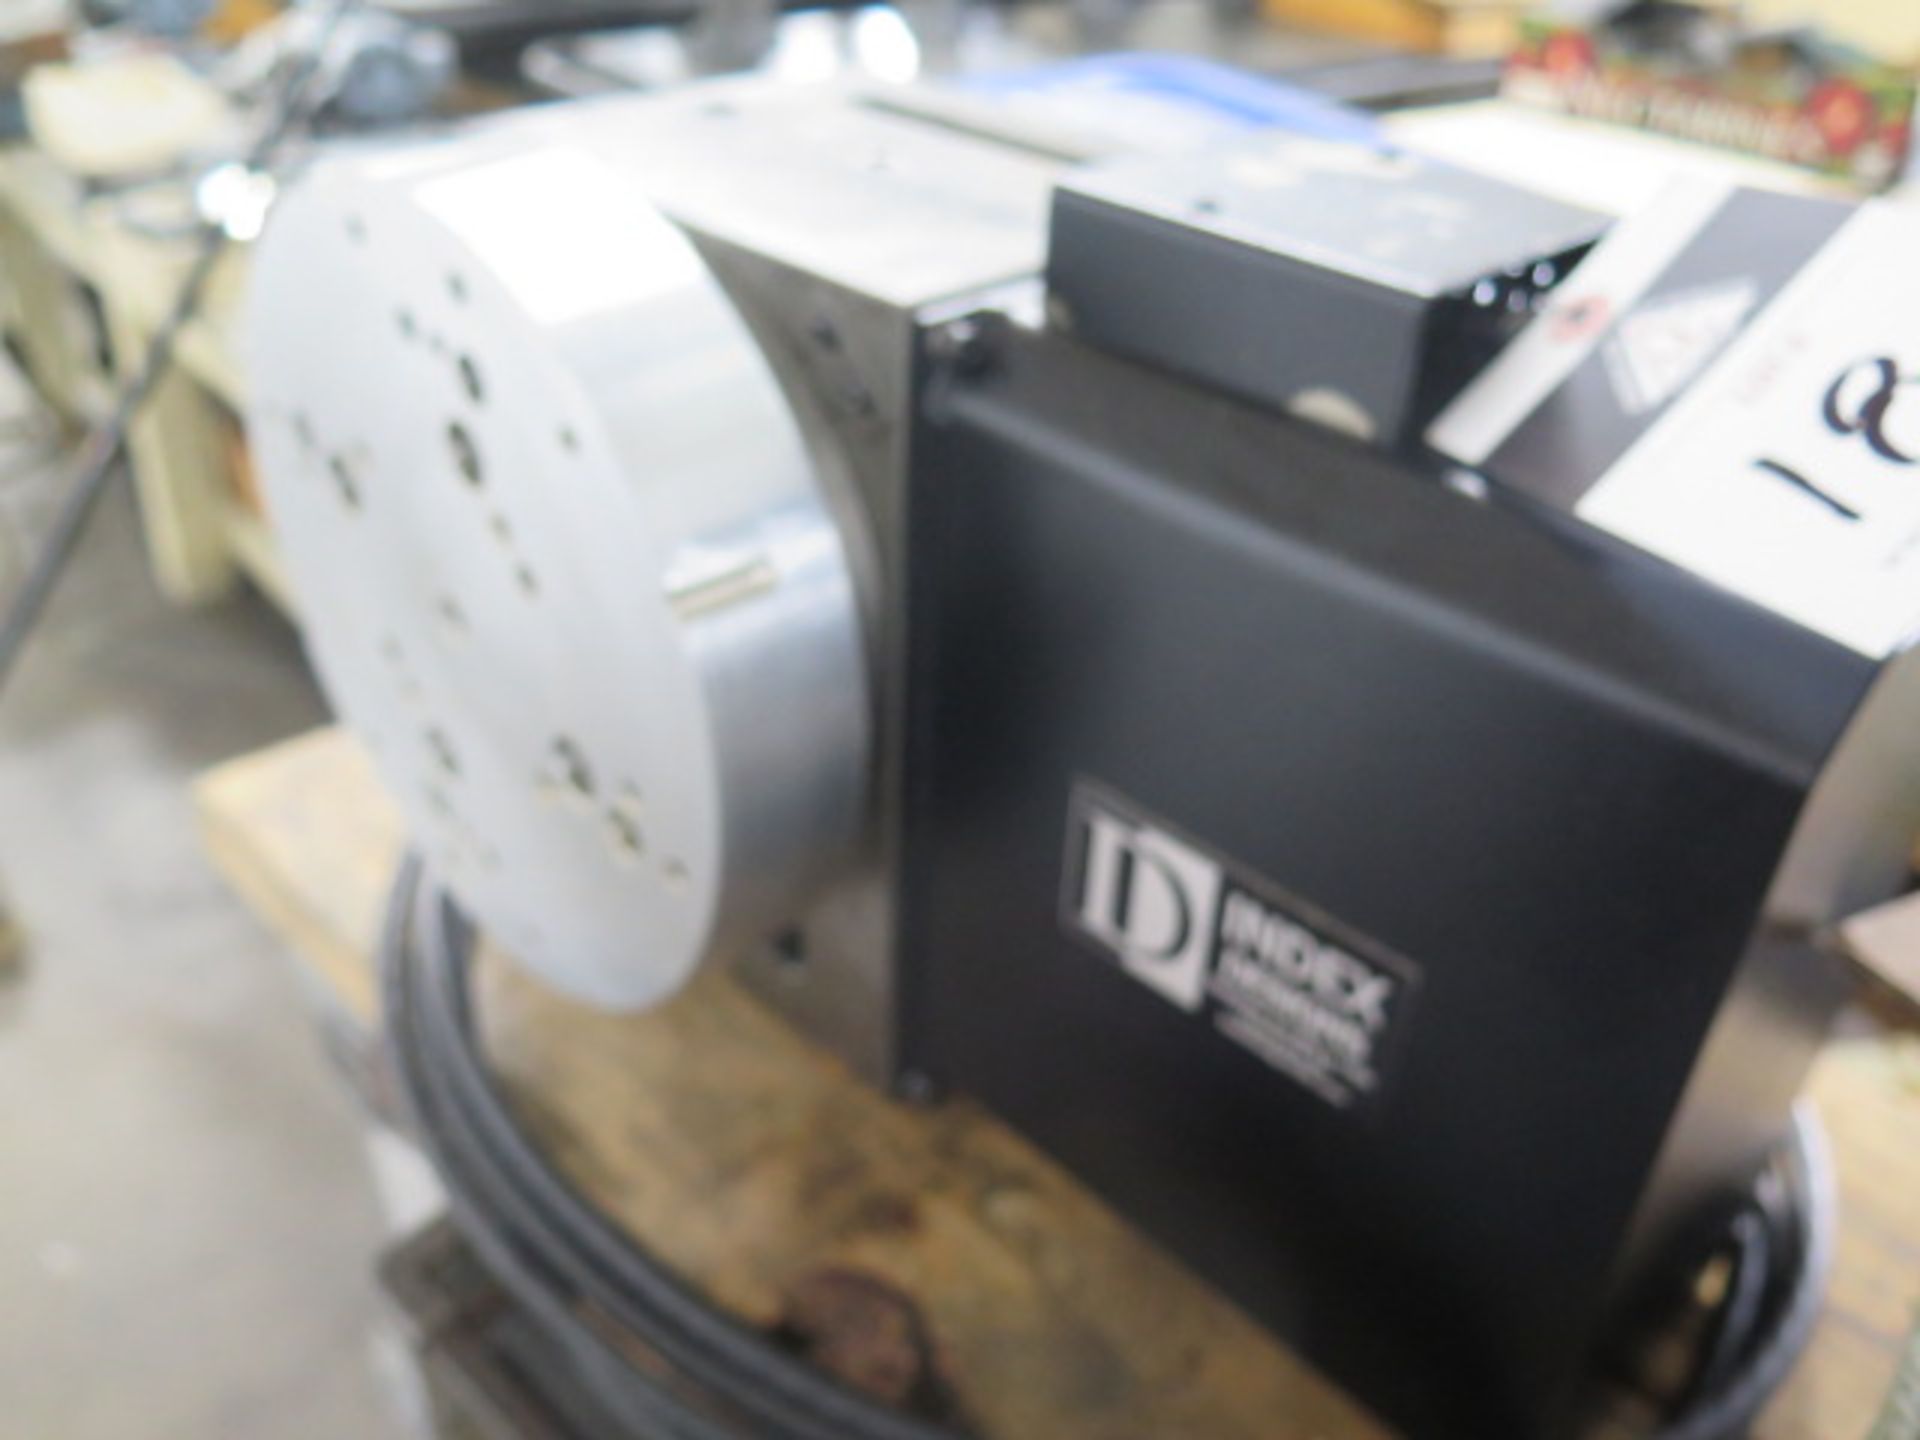 Index Designs 4th Axis 8” Rotary Head s/n ID000610 w/ Calmotion USB Indexer, 90:1 Ratio, SOLD AS IS - Image 5 of 11